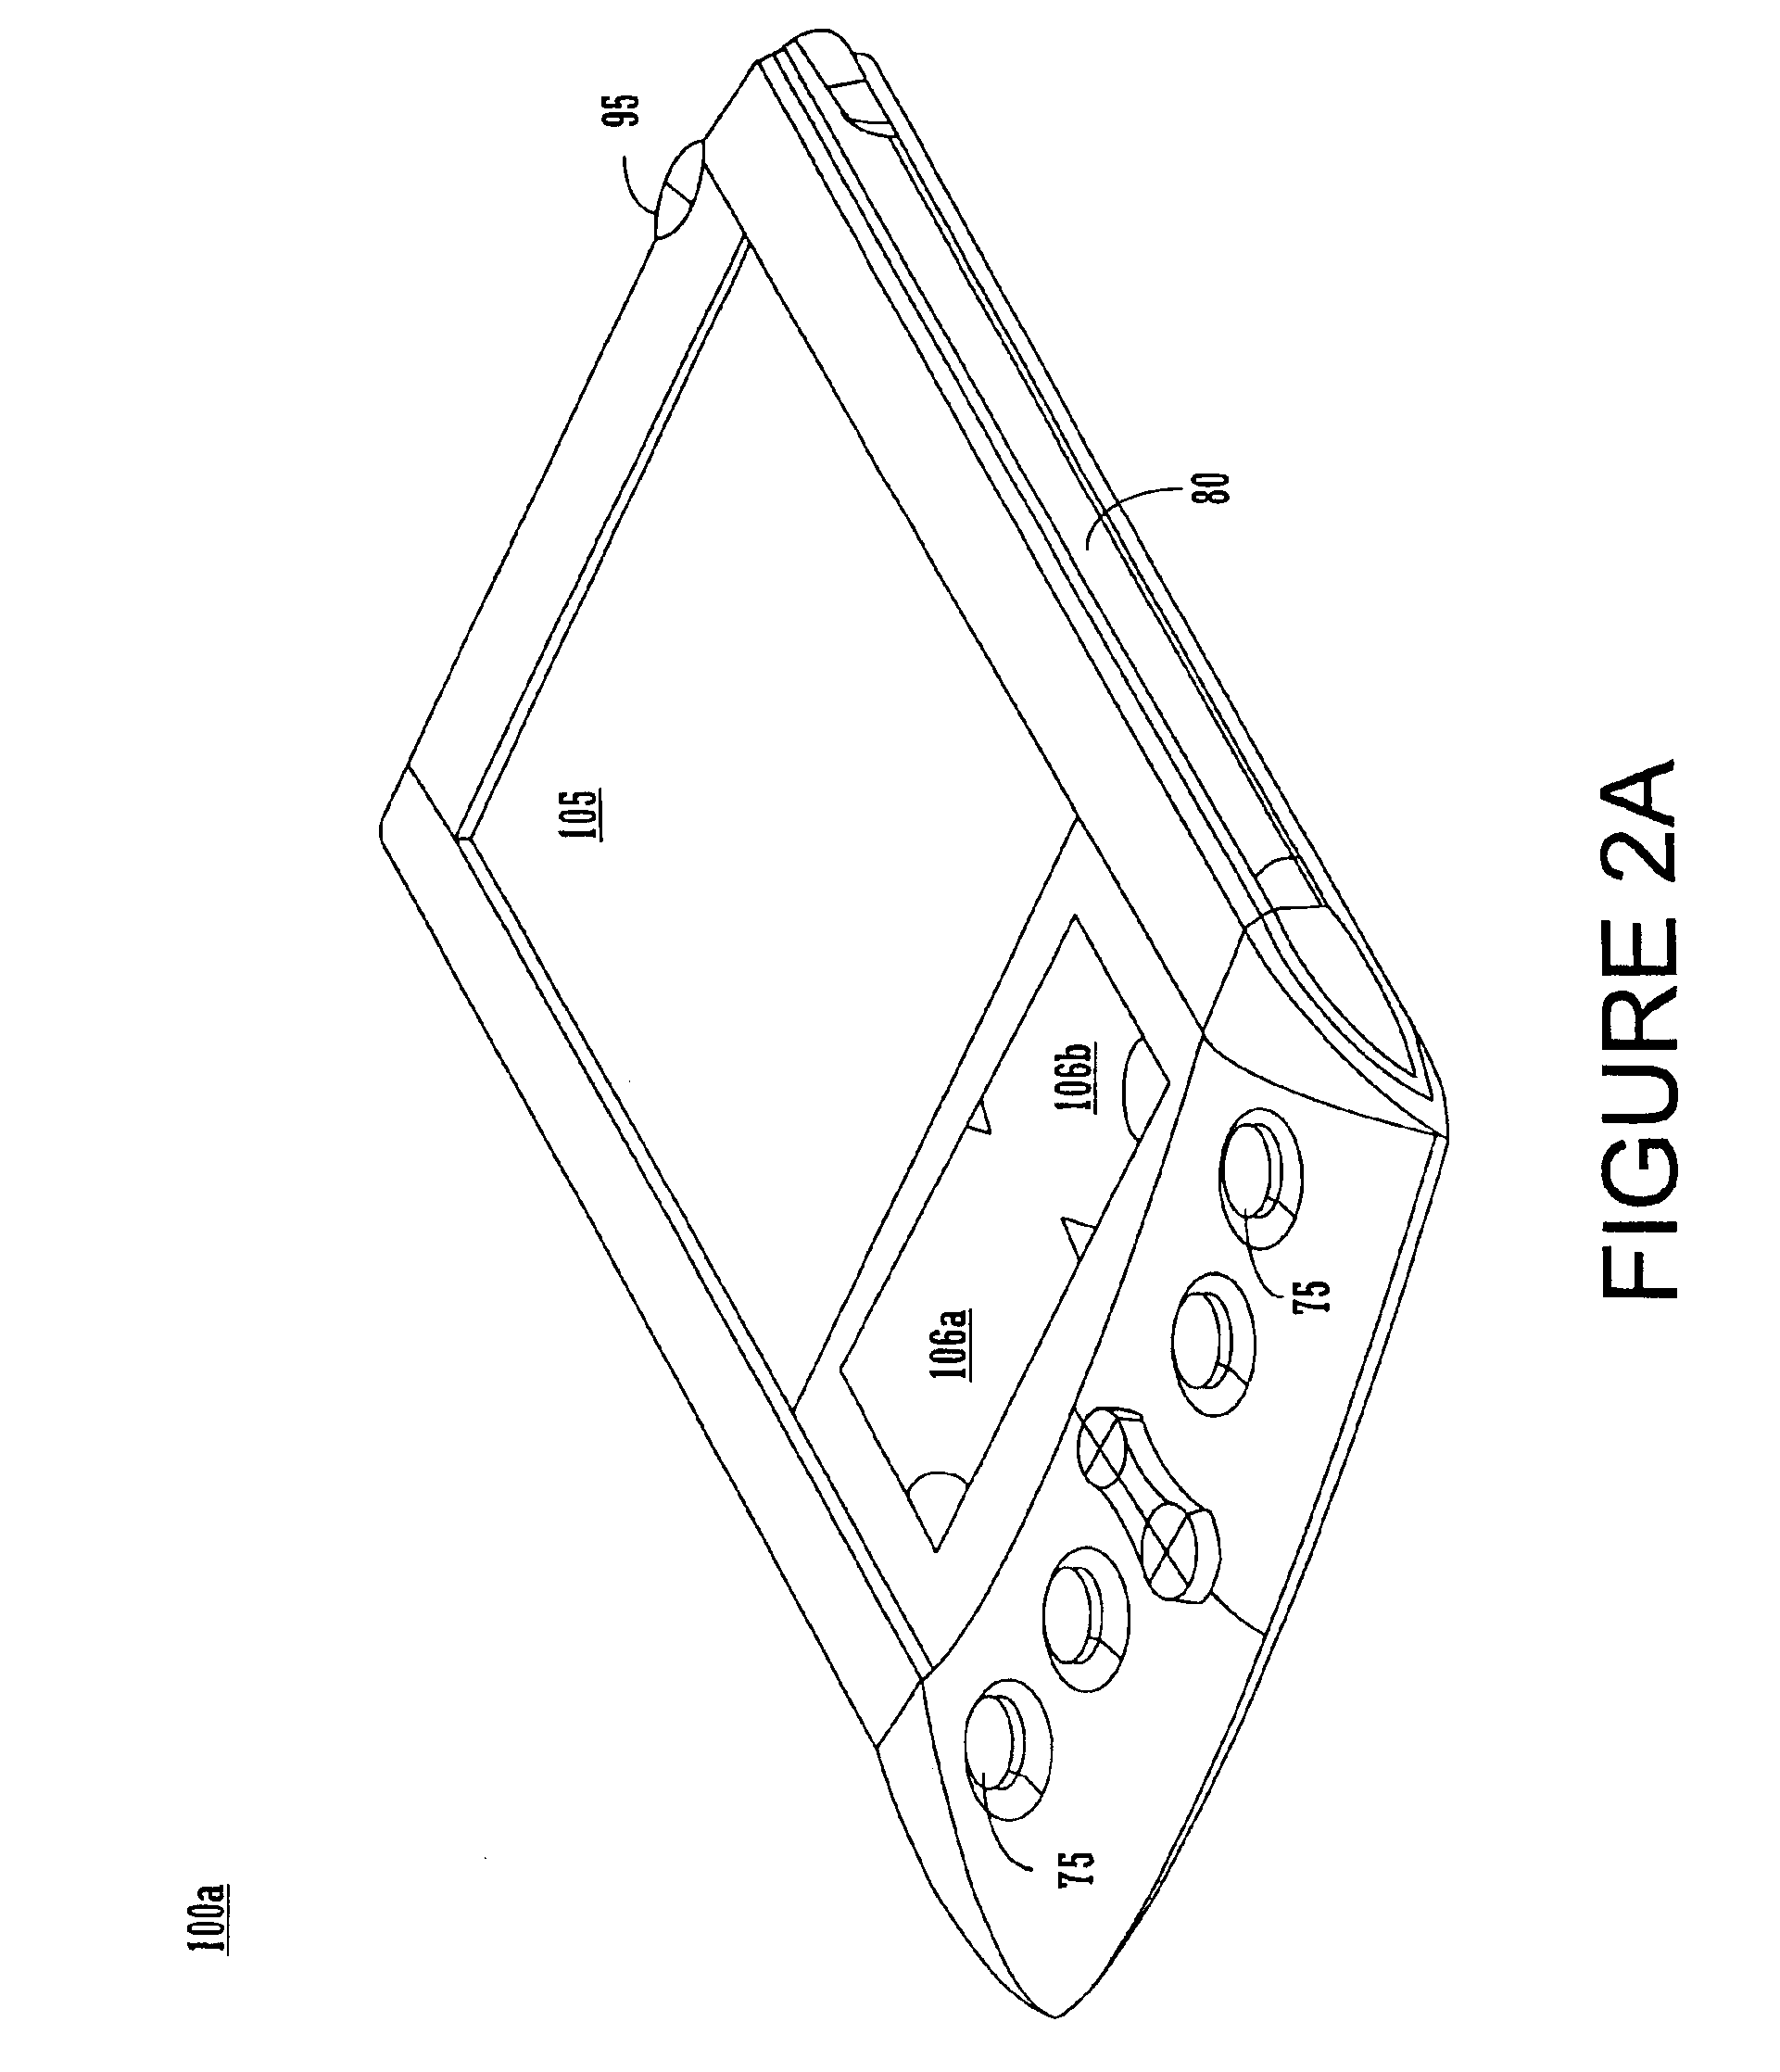 Method and apparatus for fault-tolerant update of flash ROM contents